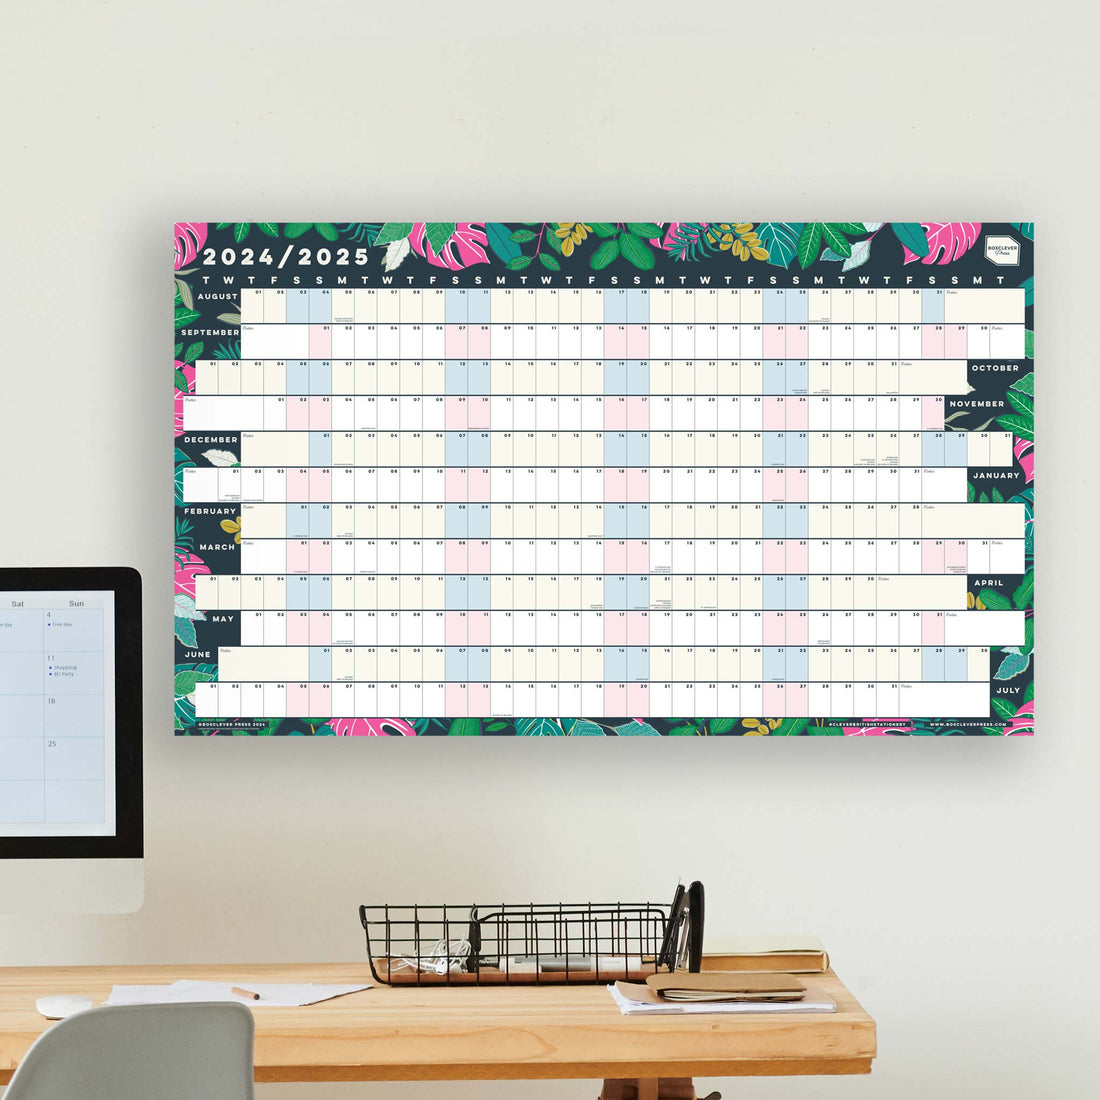 Student wall planner with leaf design hung above a wooden table